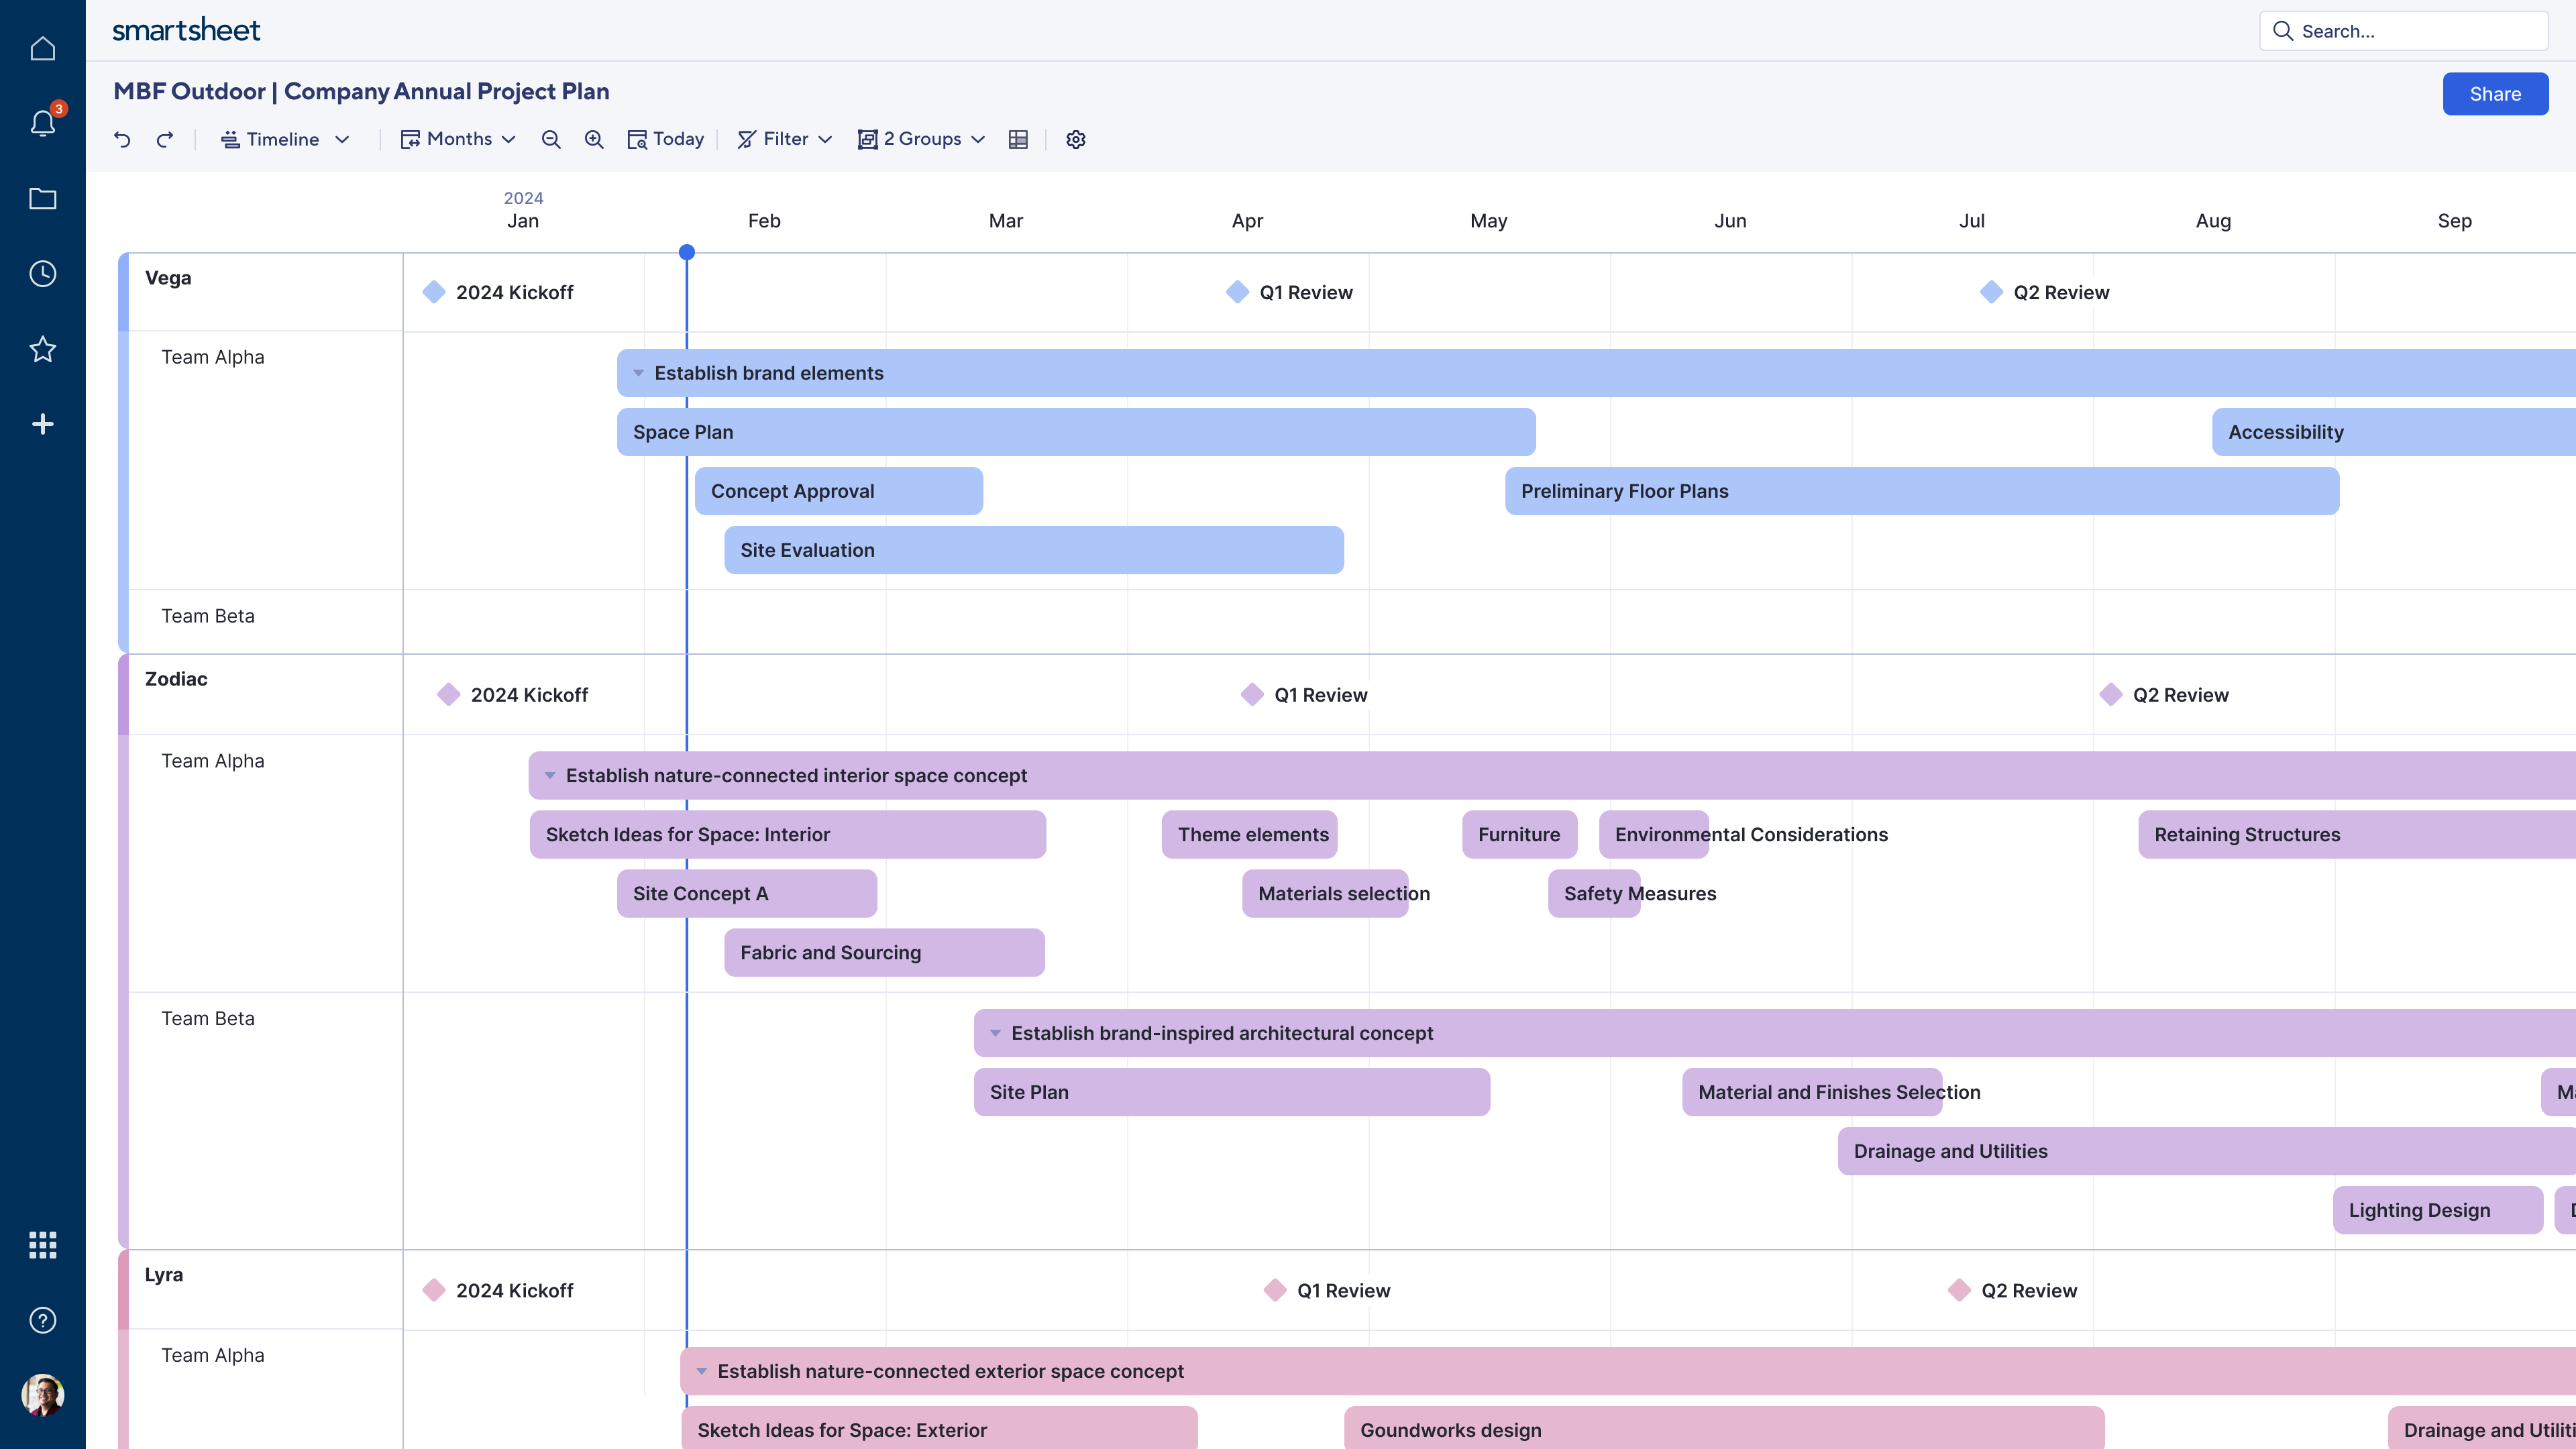 A company annual project plan visualized in the new Smartsheet timeline view, that organize project tasks into horizontal lanes.